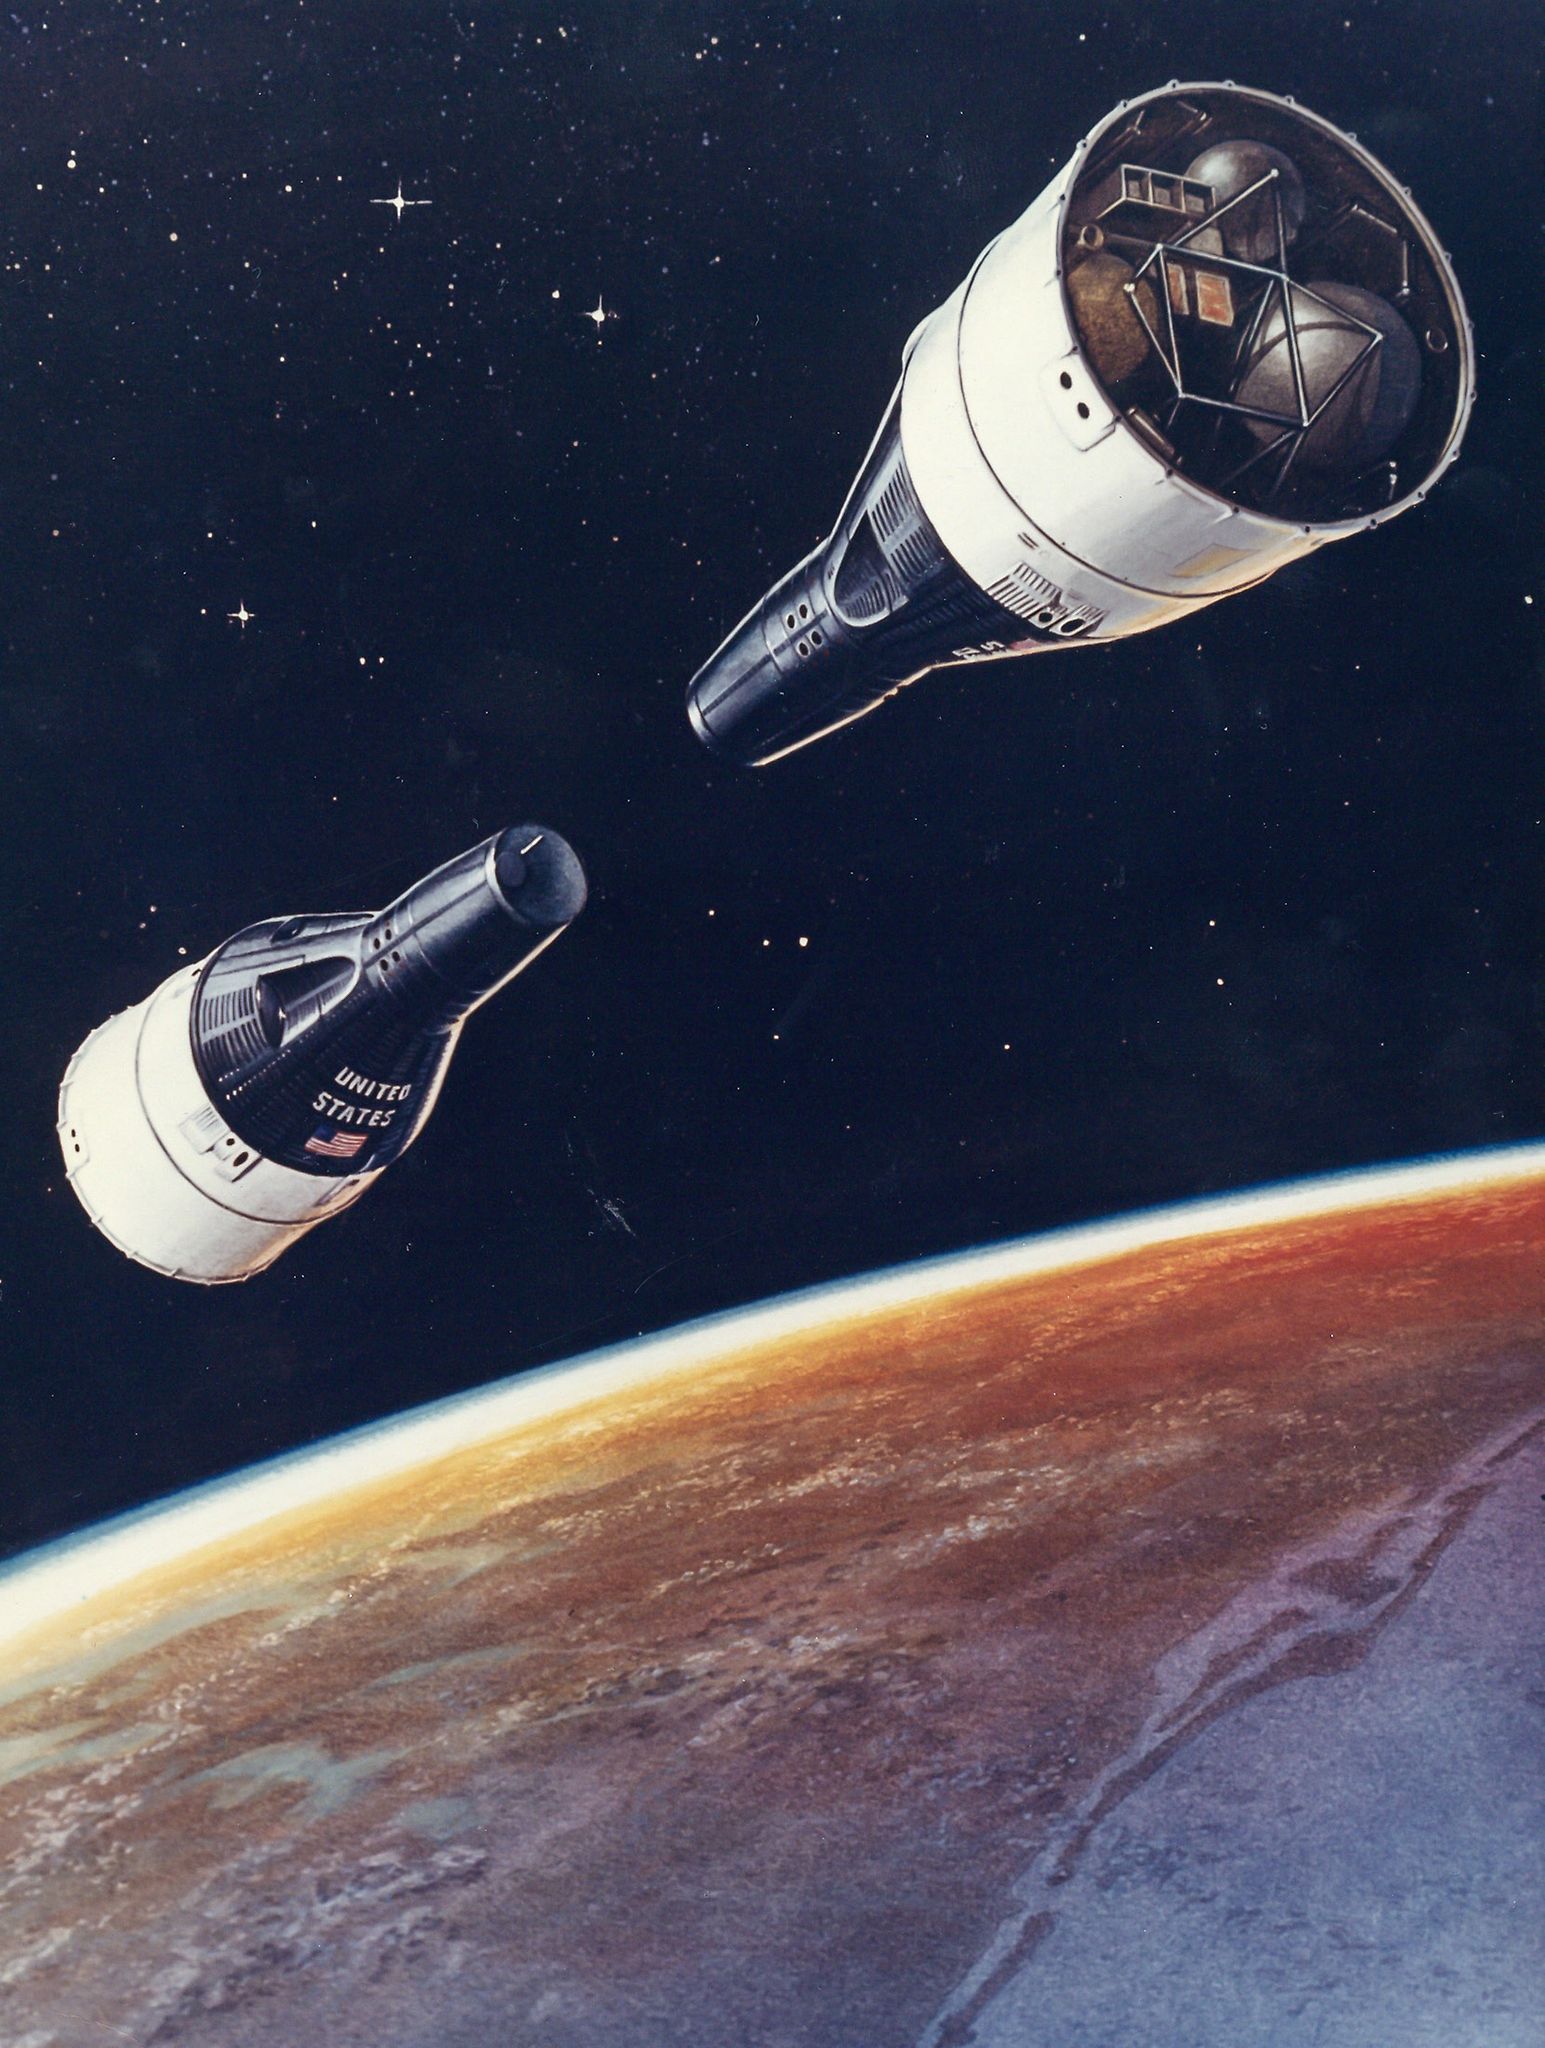 Artist’s concept of the rendezvous and recovery of the “twin” spacecraft Gemini 6 and Gemini 7,